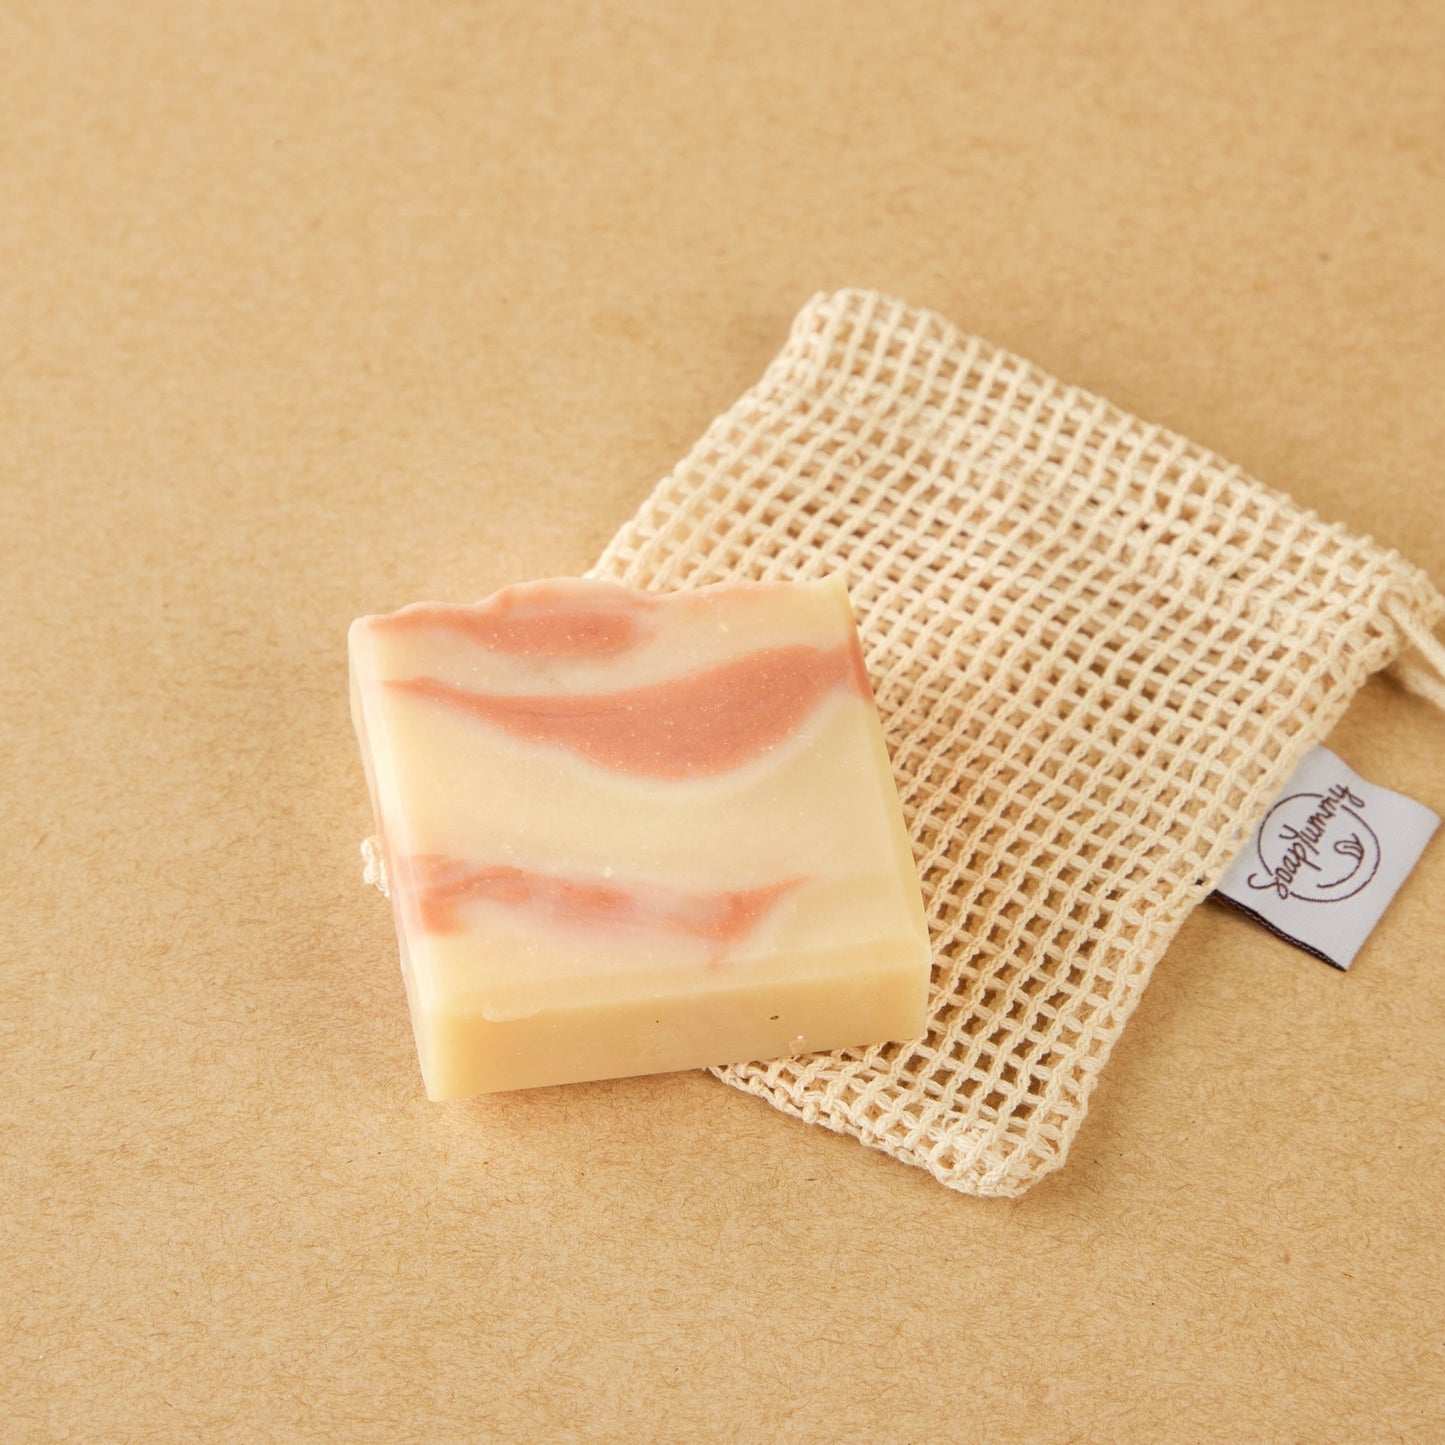 Exfoliating Linen Cotton Soap Pouch by Soap Yummy - BetterThanFlowers